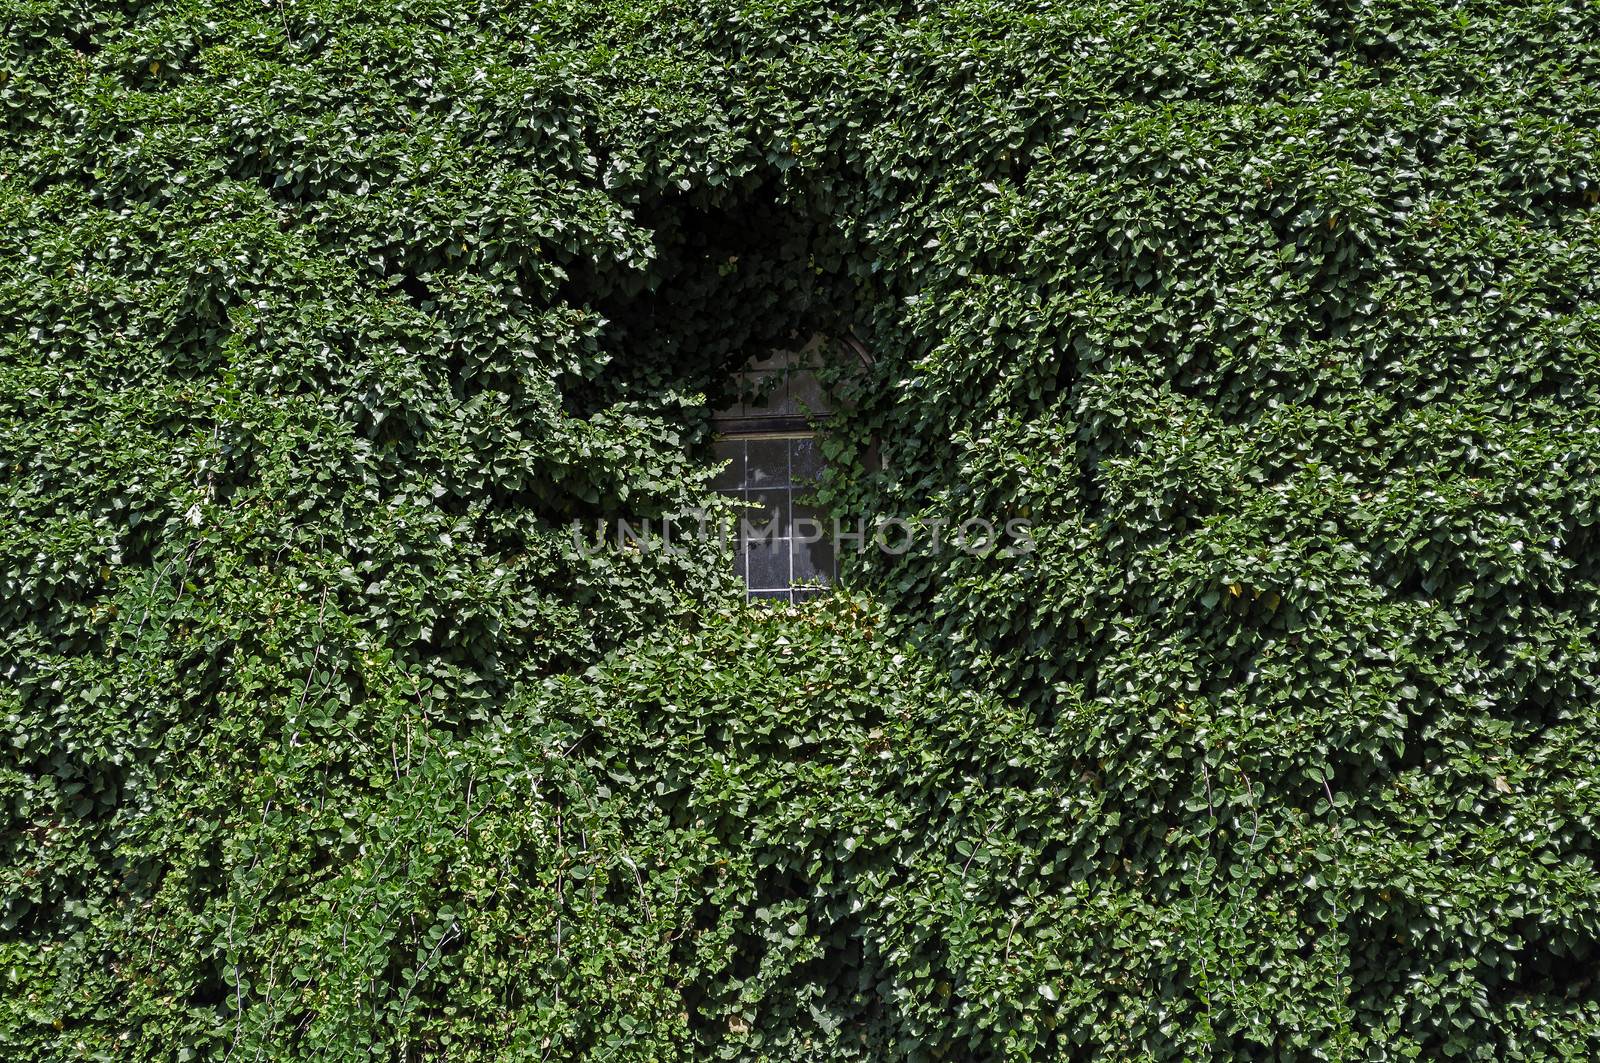 Image of an ivy covered wall and window.